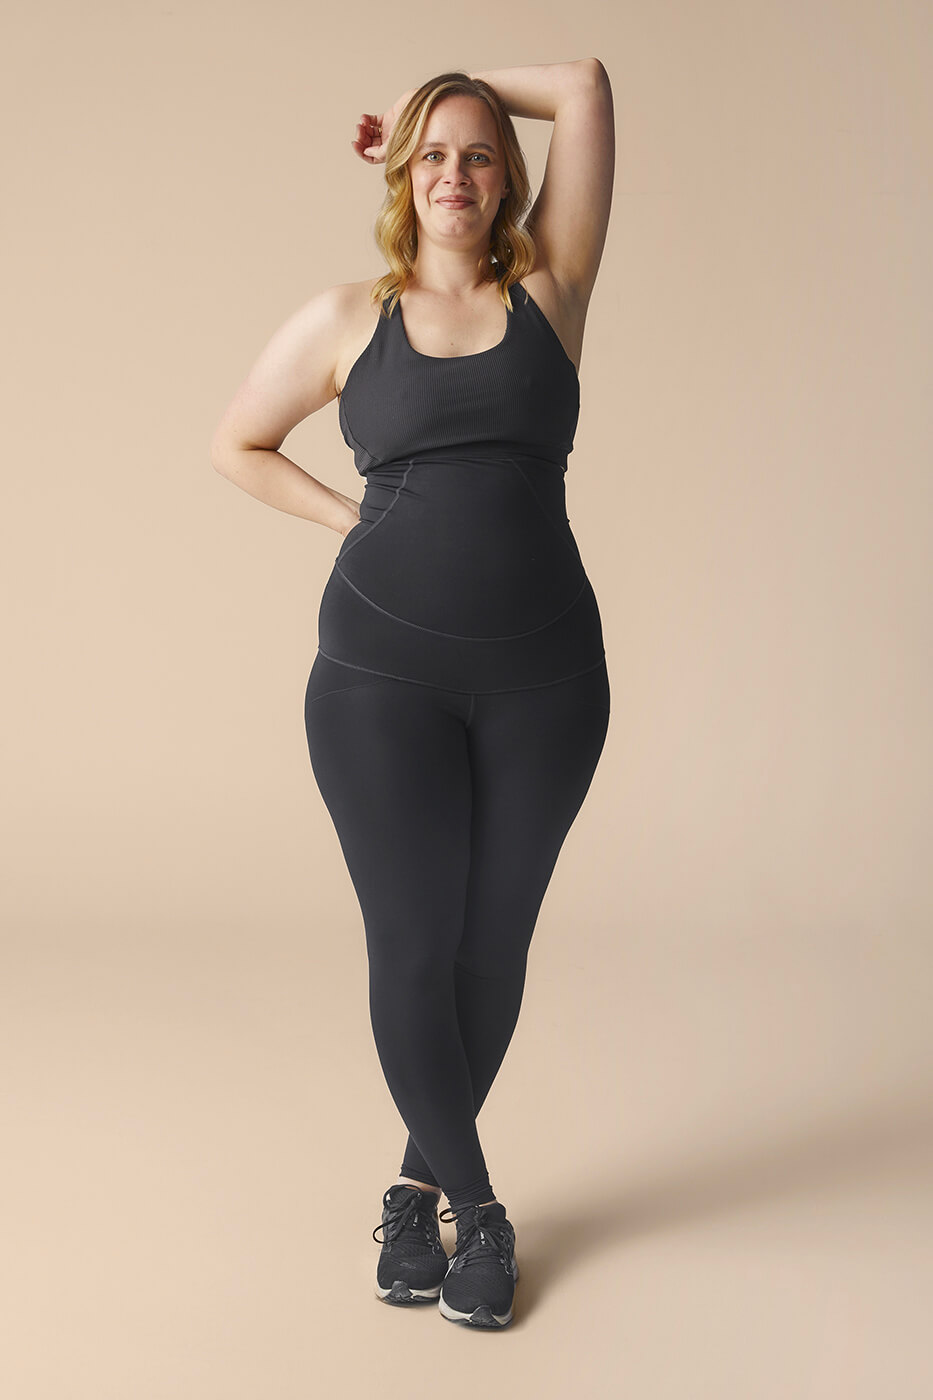 Benefits of Compression Wear for Pregnancy, Postpartum and Prolapse